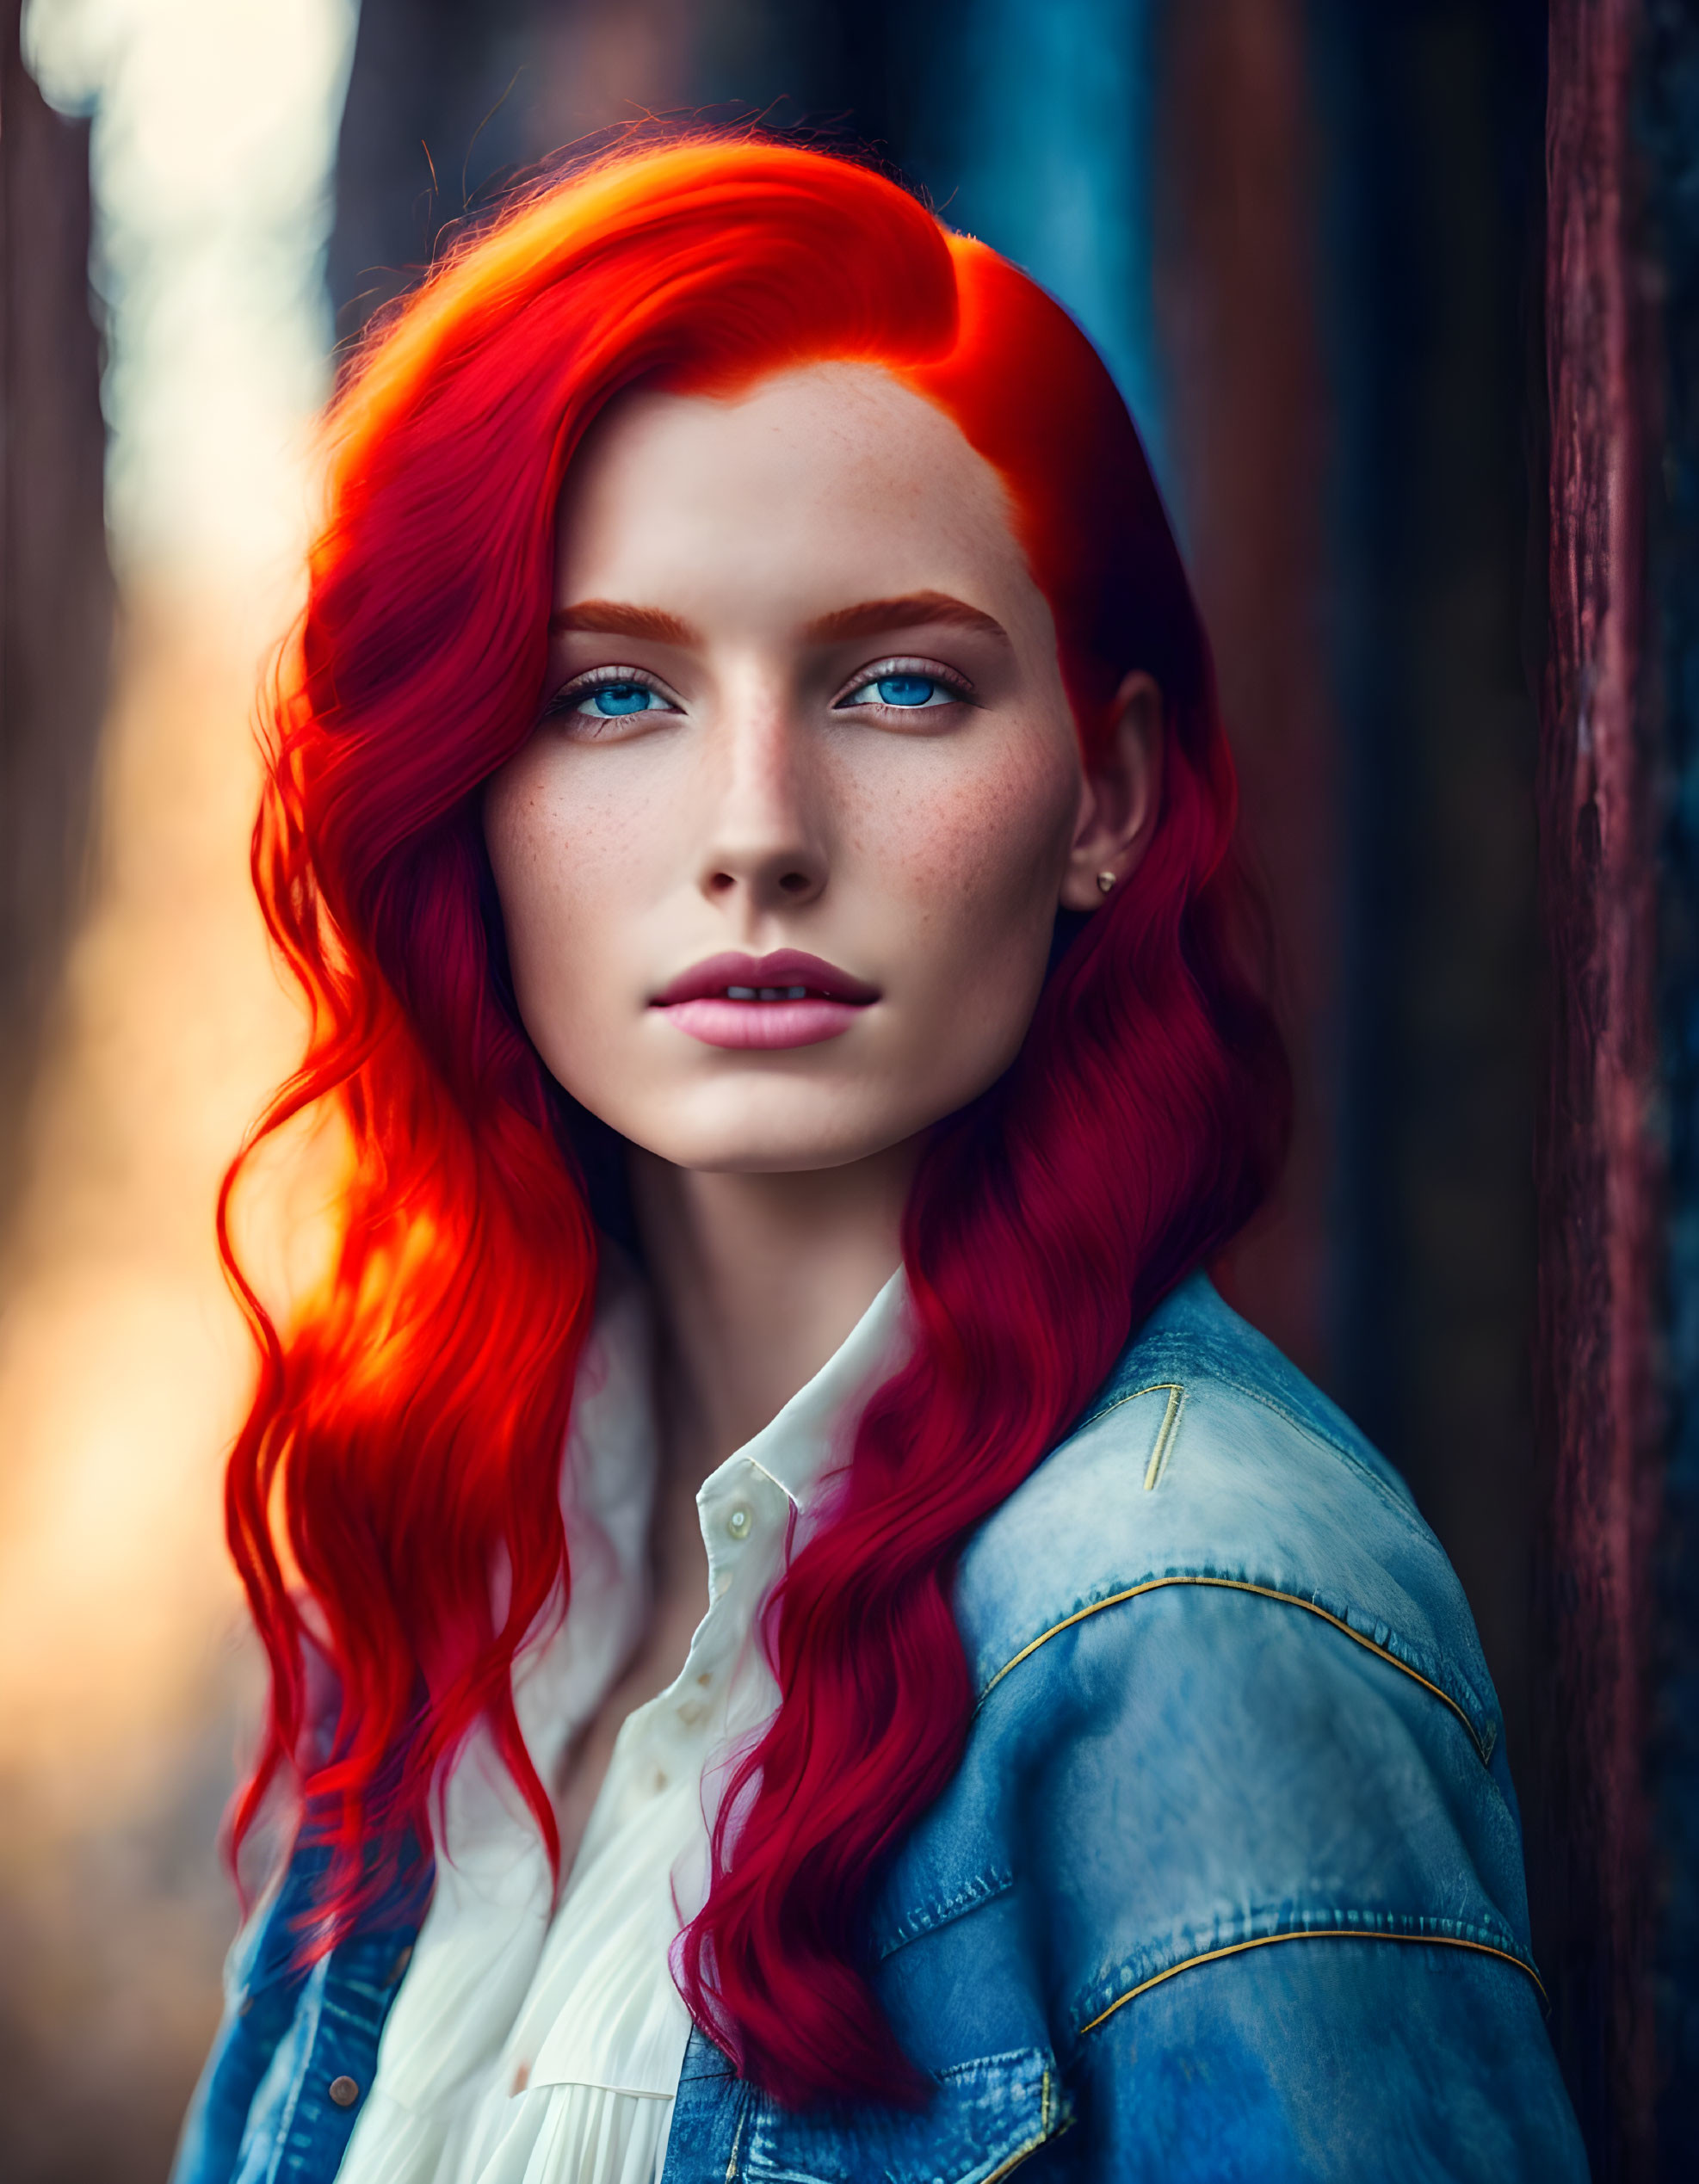  A dreamy photo of a girl with red hair